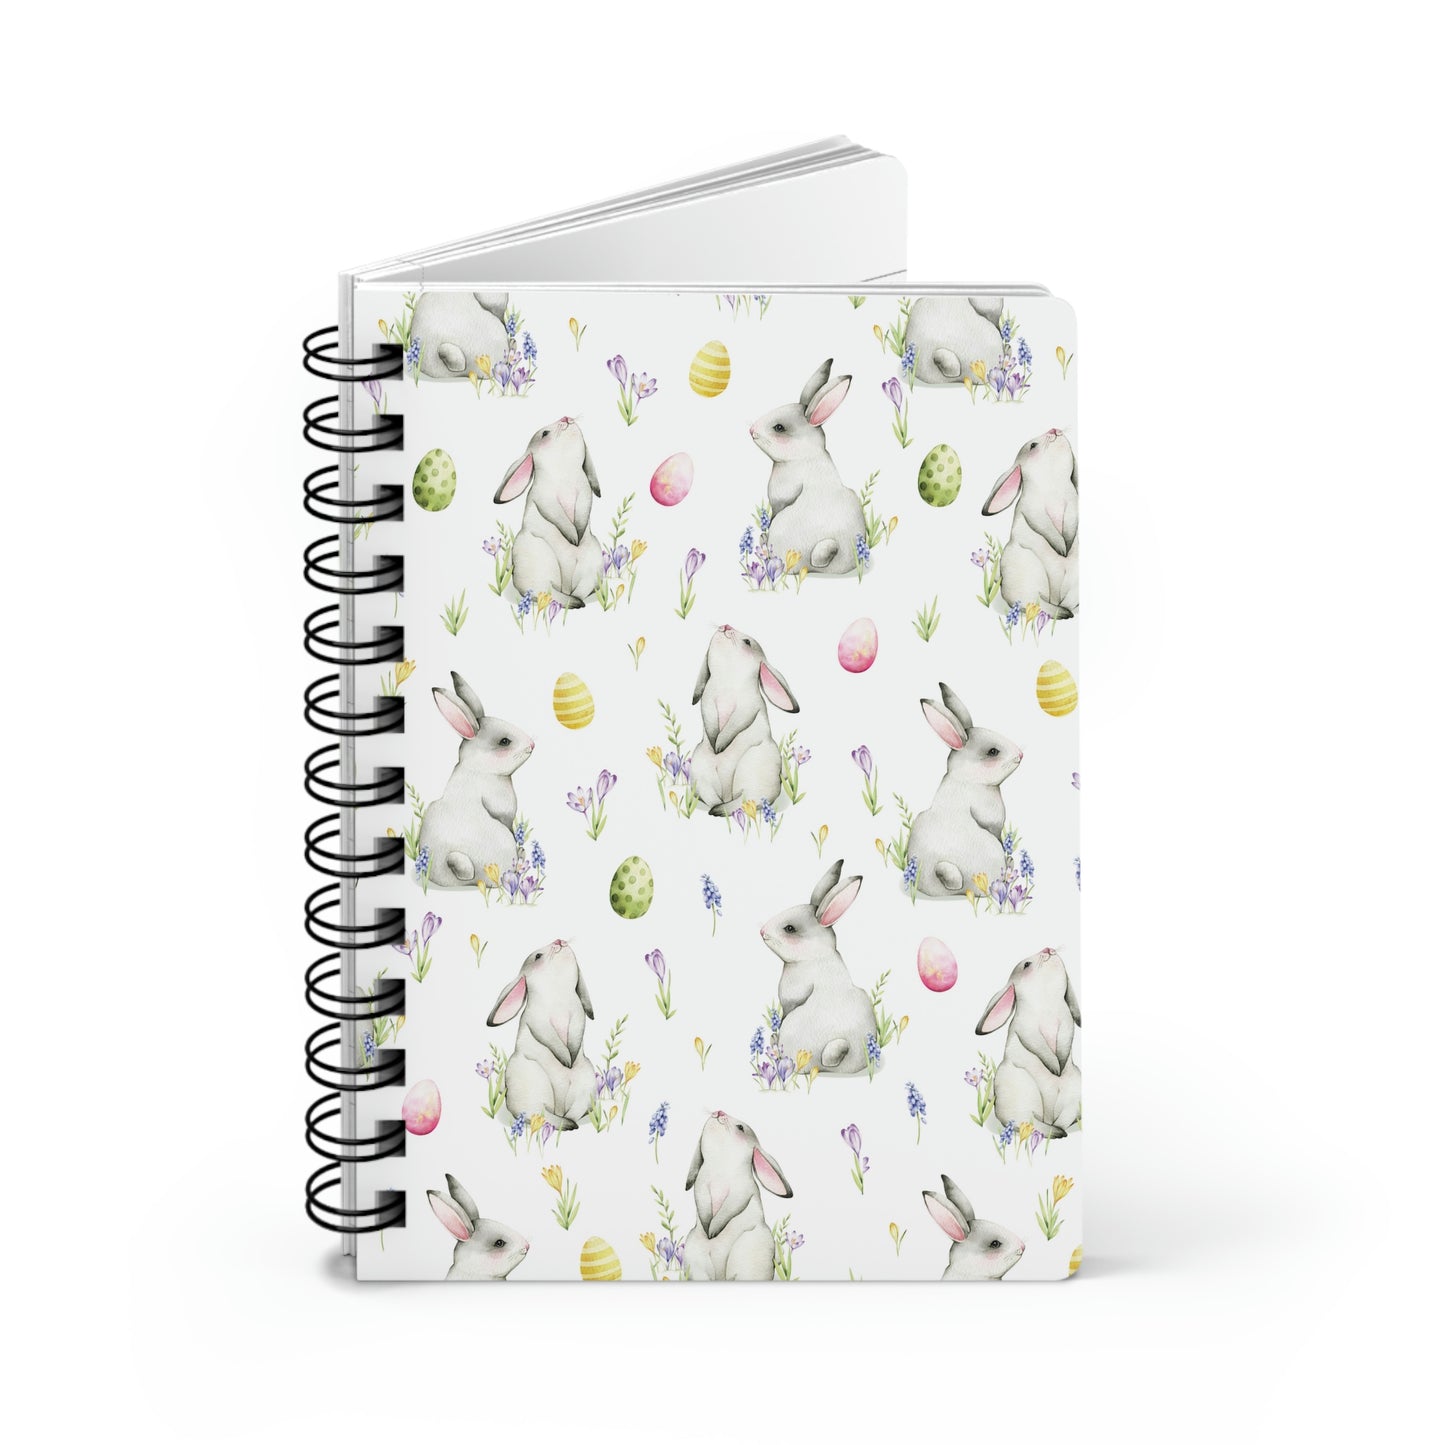 Cottontail Bunnies and Eggs Spiral Bound Journal